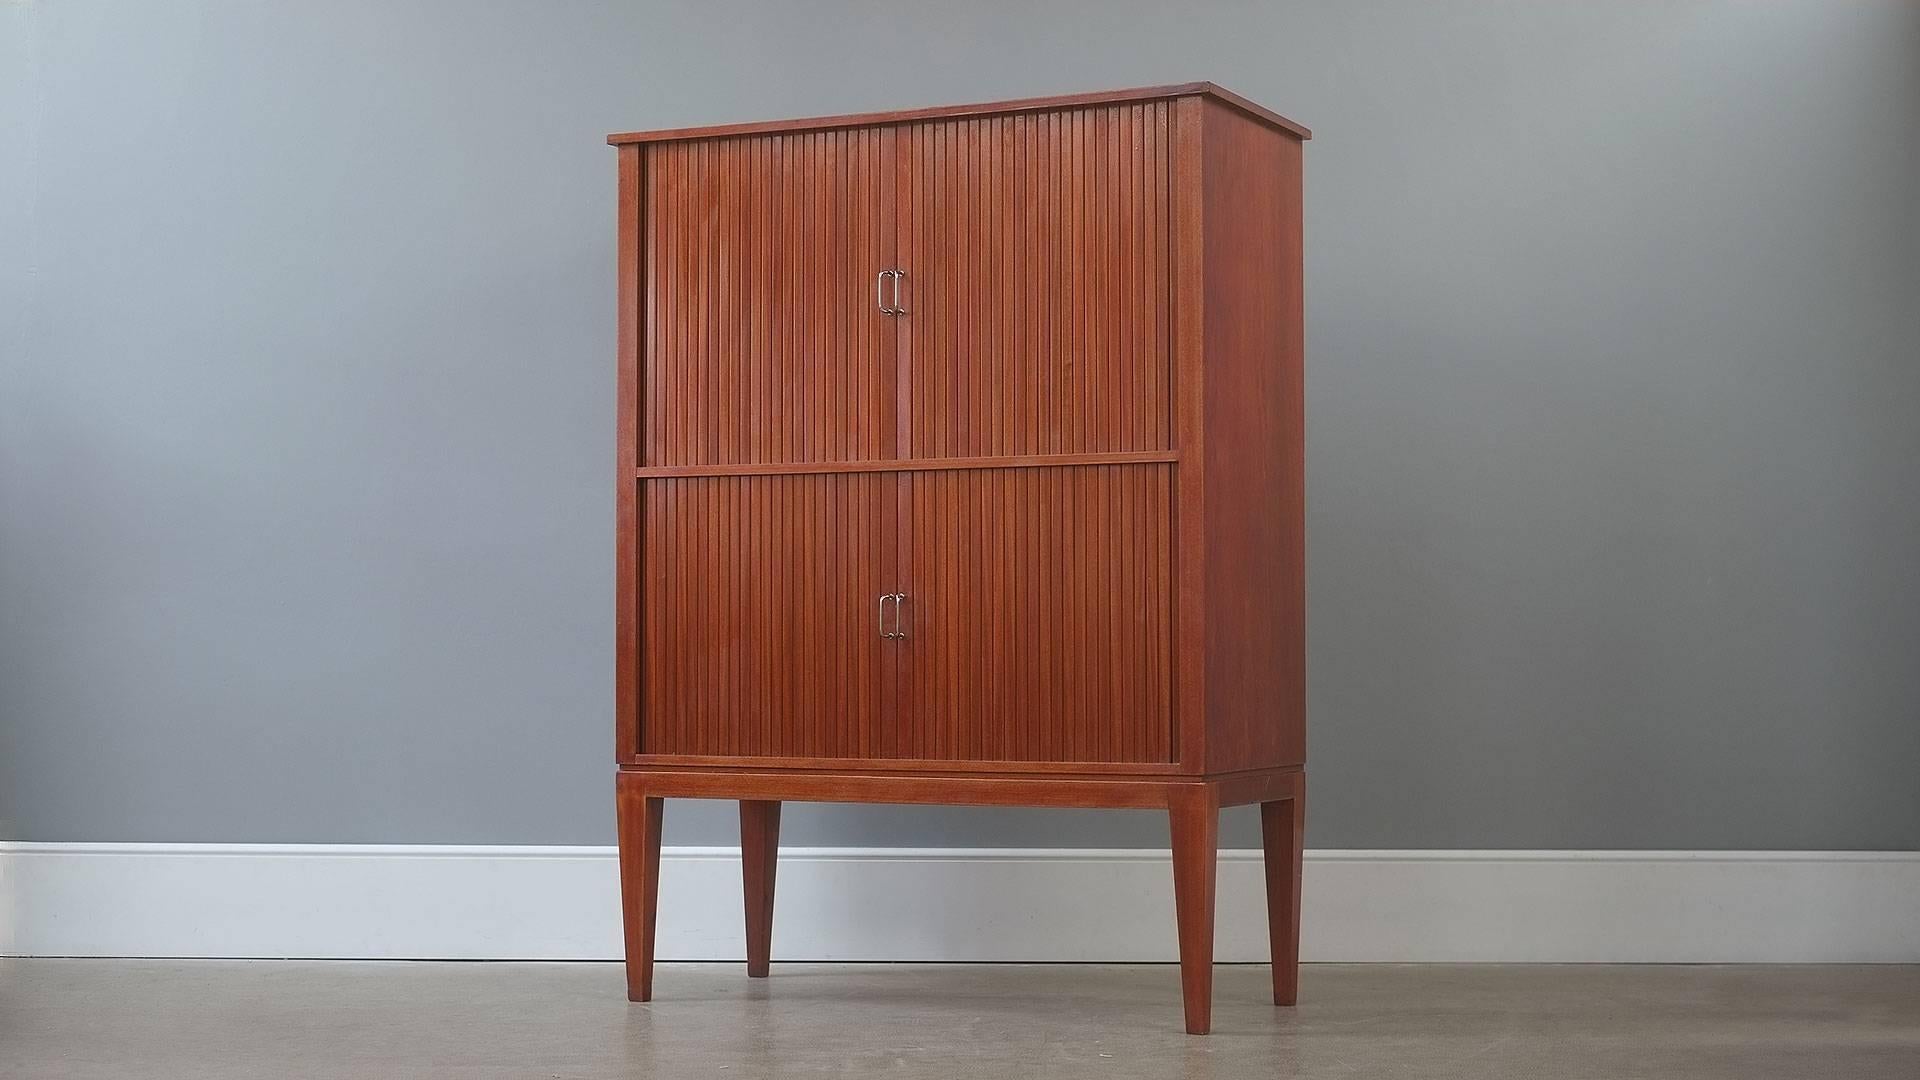 Truly spectacular 1940s Danish collectors cabinet in mahogany with tambour doors. Specially commissioned piece with 50 internal drawers by an unknown Danish cabinet maker. Ultra elegant proportions and superb quality one of a kind piece.